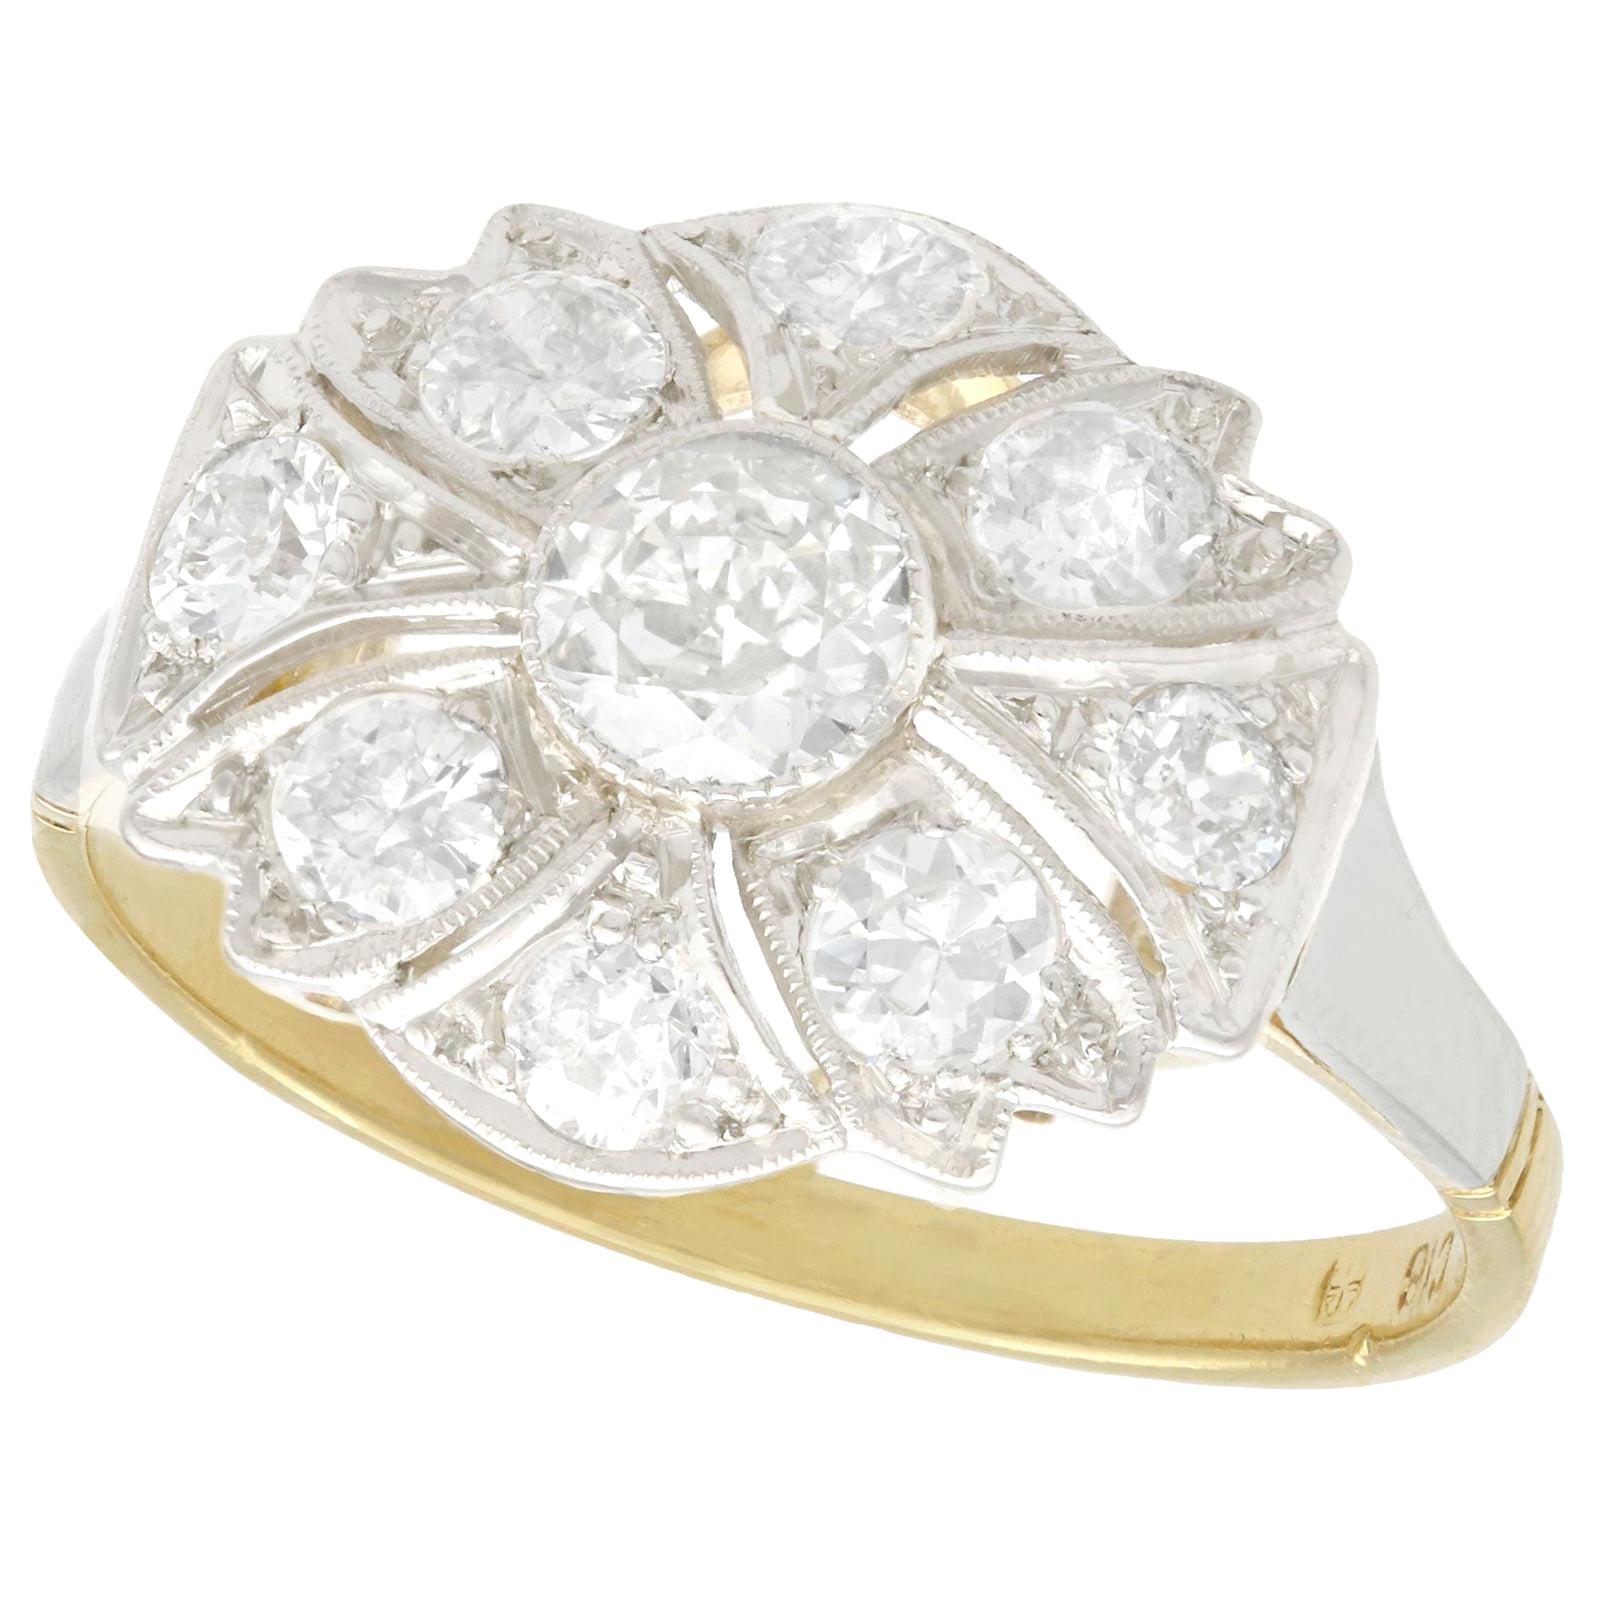 Art Deco 1.42 Carat Diamond and Yellow Gold Cocktail Ring, Circa 1925 For Sale